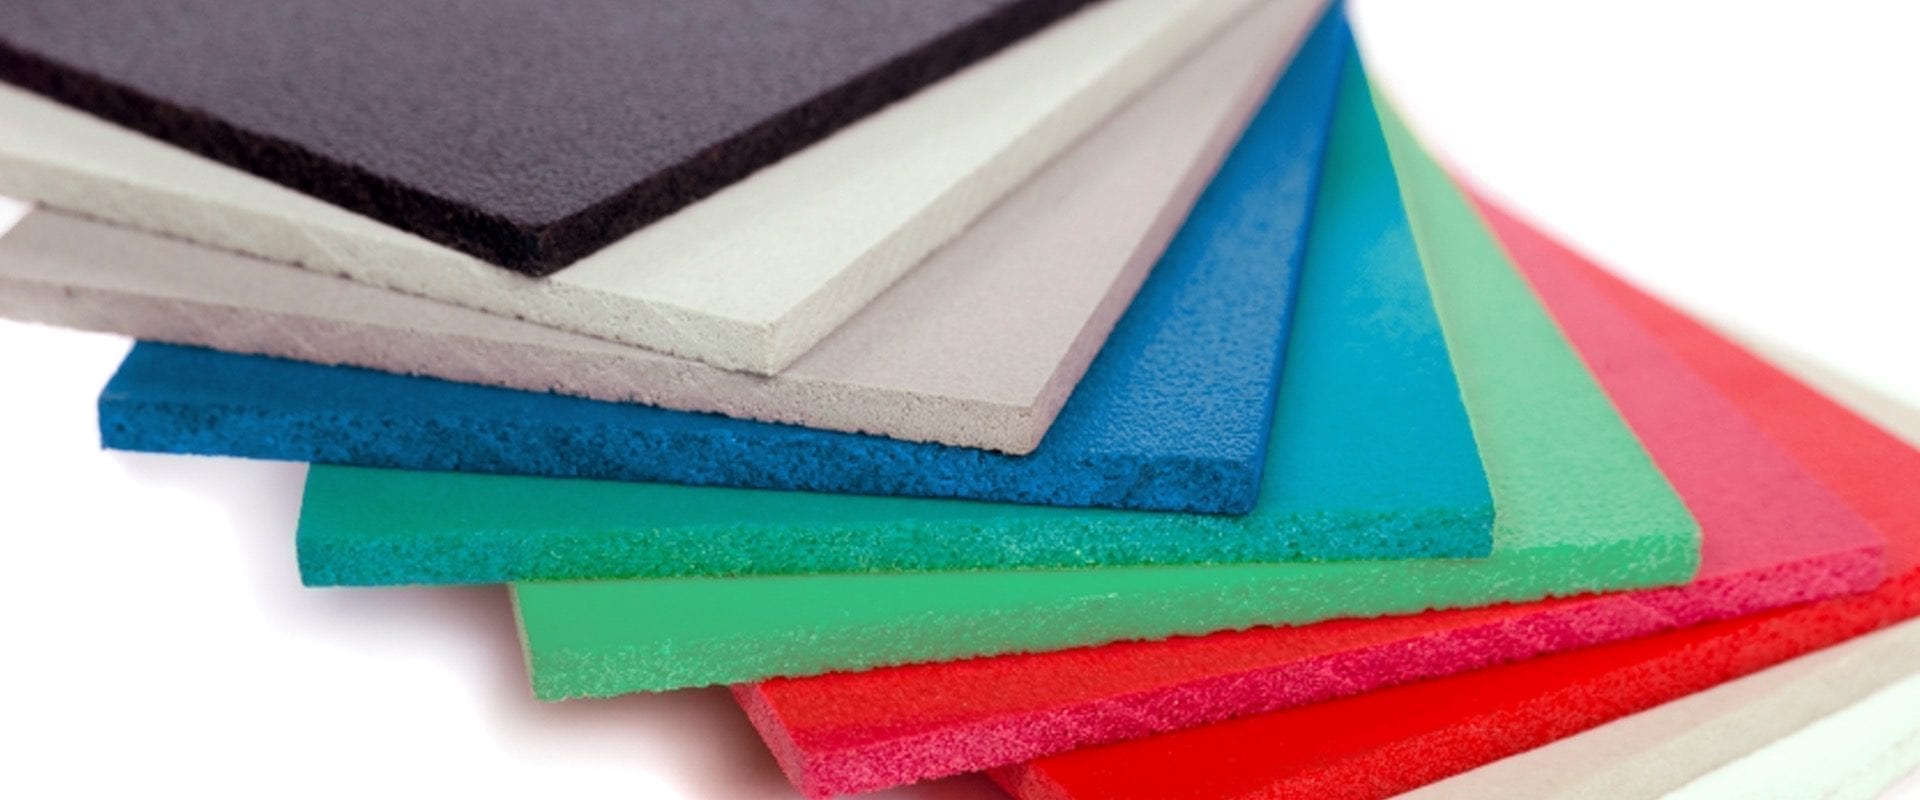 Sheets such as ABS sheets, PS sheets, PP / PVC sheets